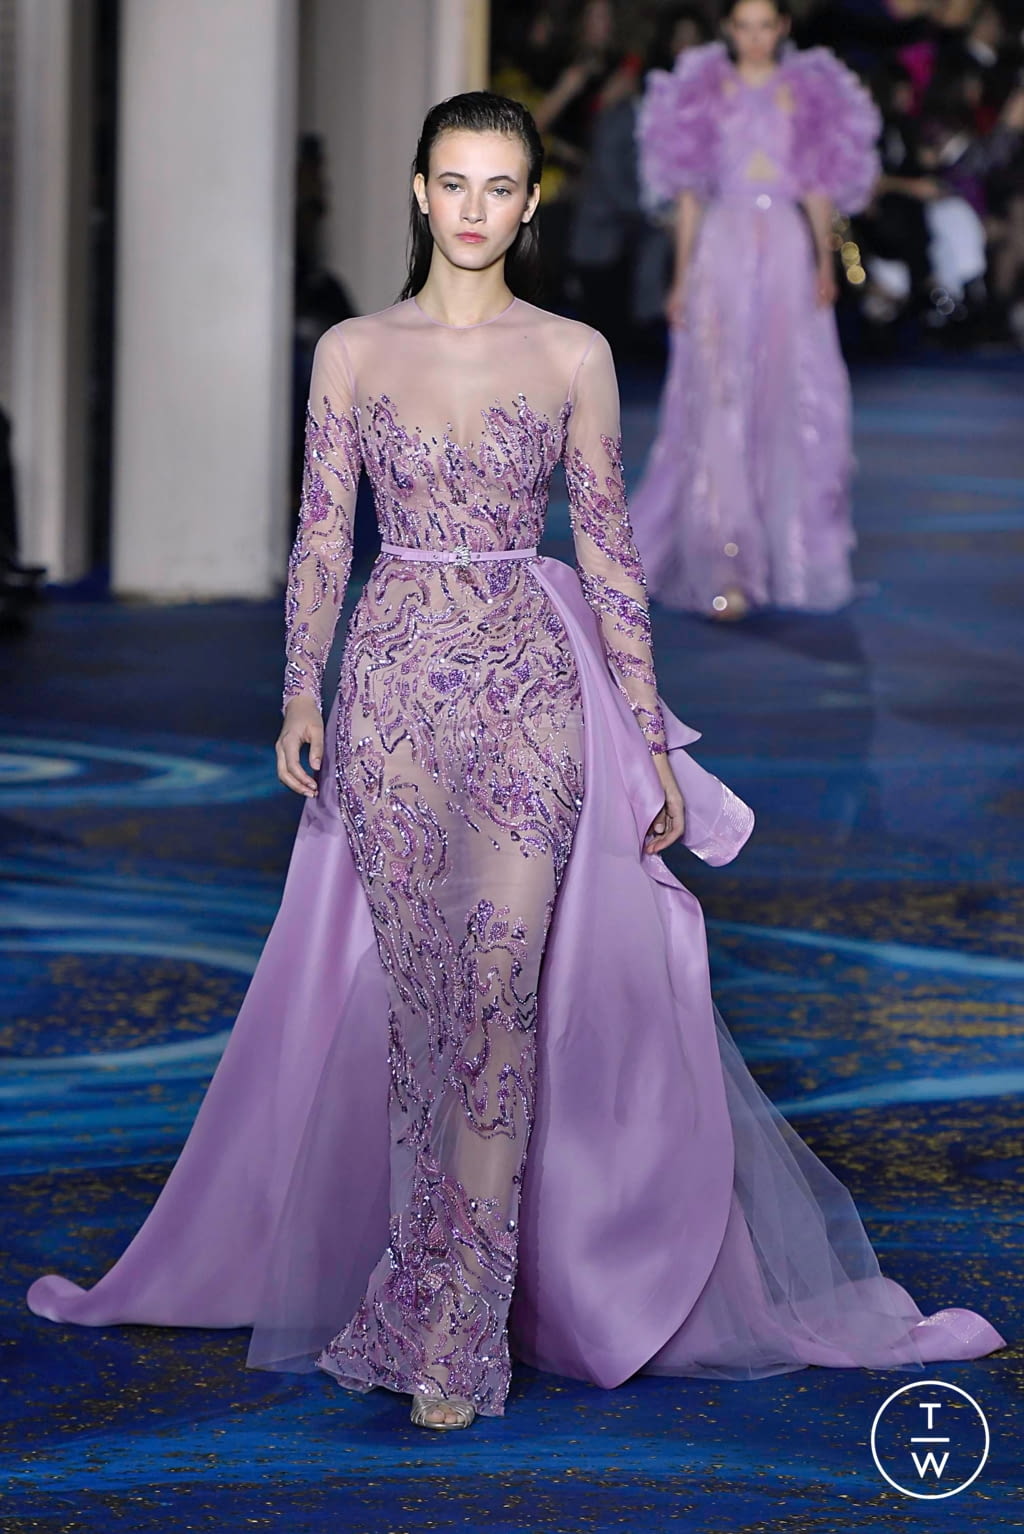 Zuhair Murad S/S19 couture #39 - Tagwalk: The Fashion Search Engine